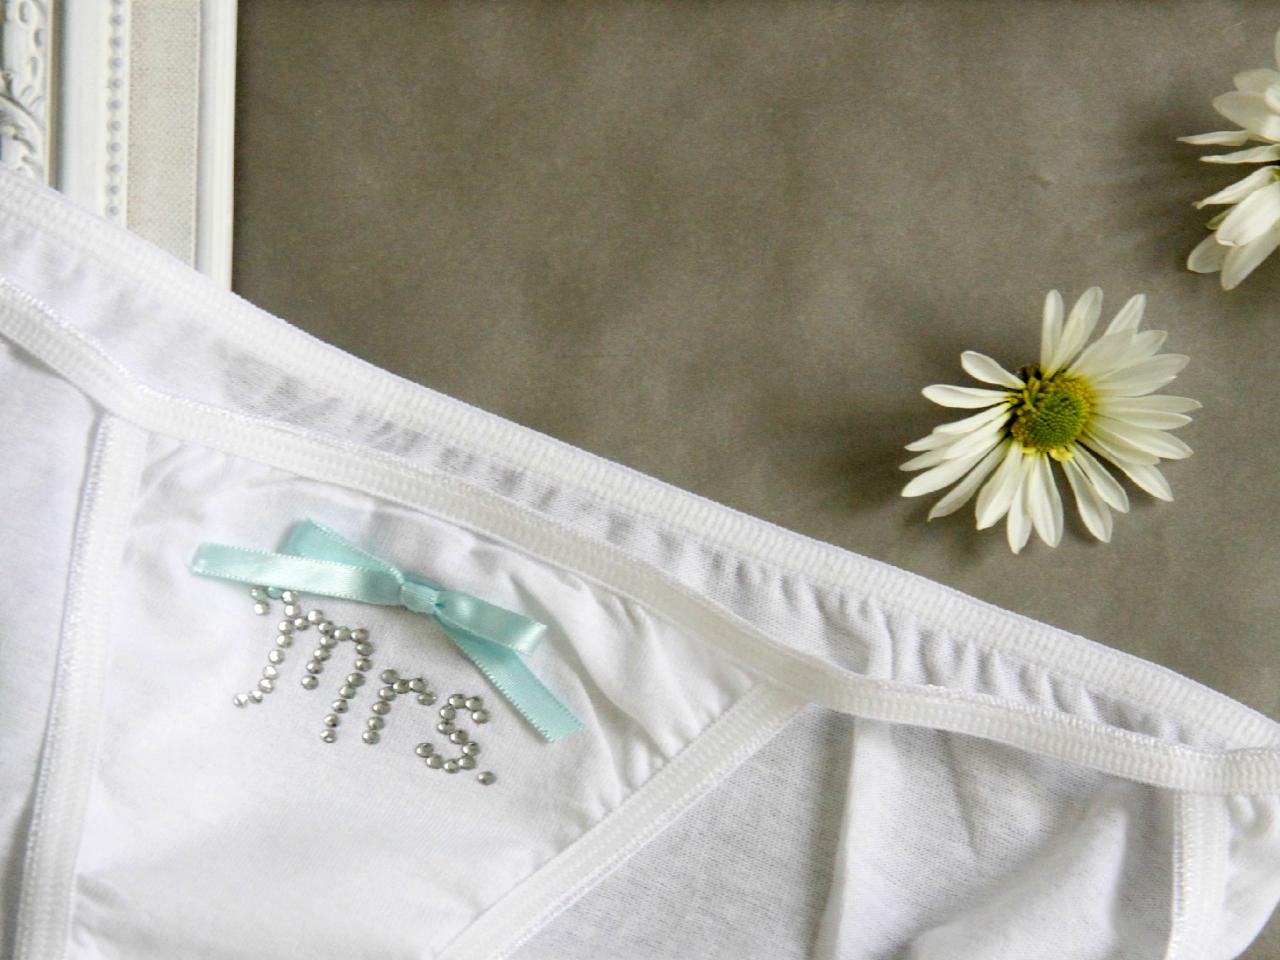 embellish a pair of panties for a wedding shower gift | how-tos | diy